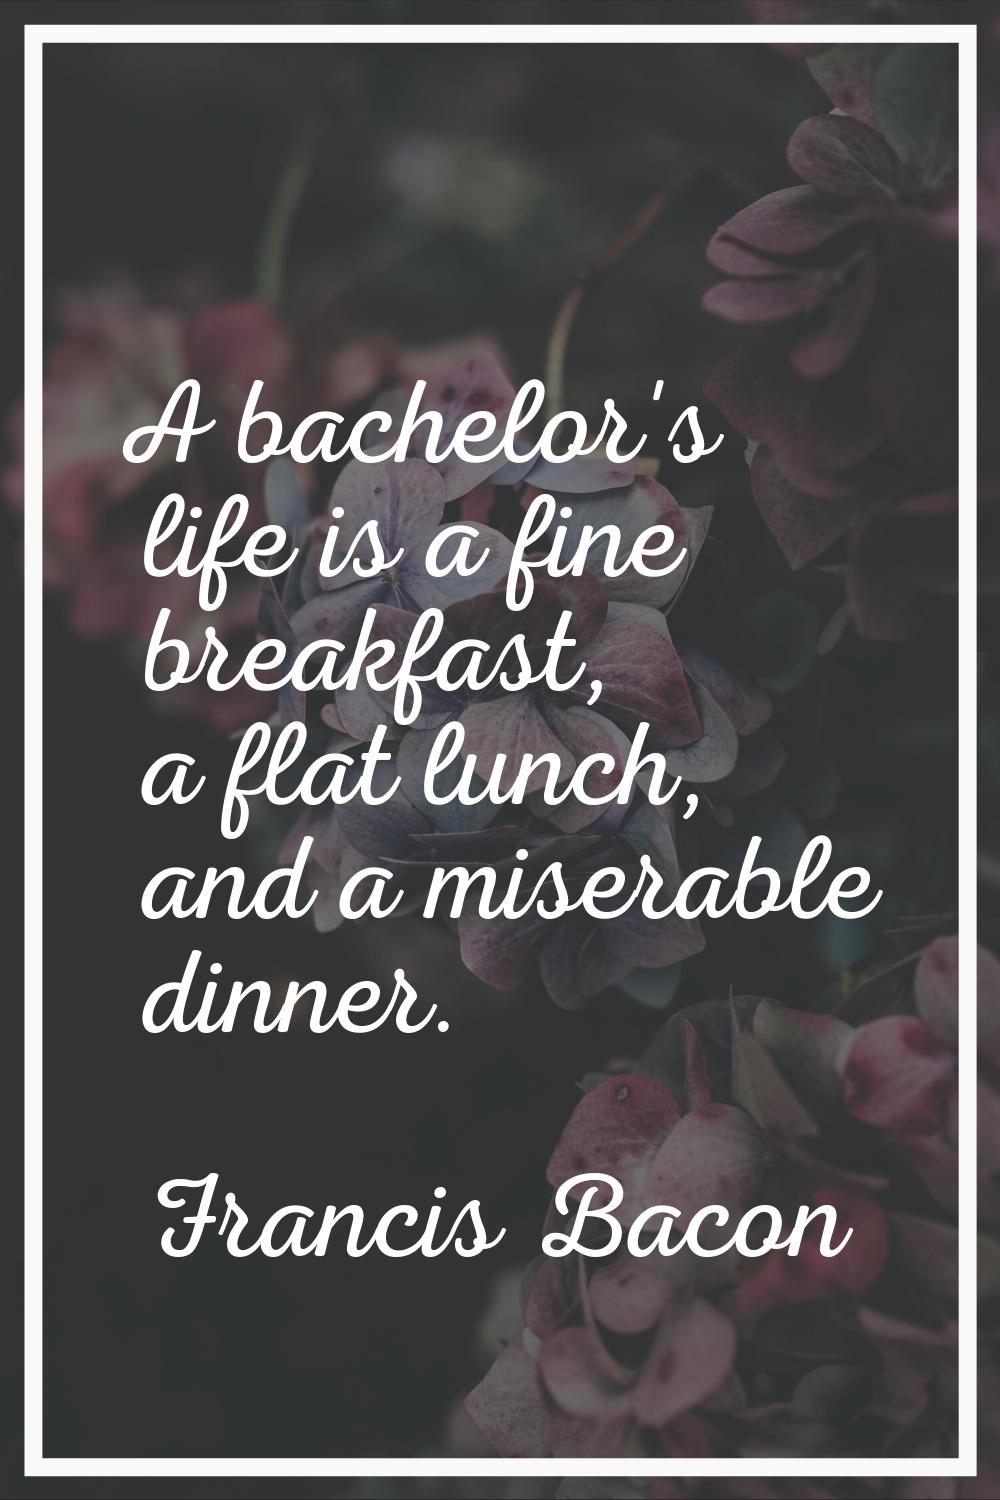 A bachelor's life is a fine breakfast, a flat lunch, and a miserable dinner.